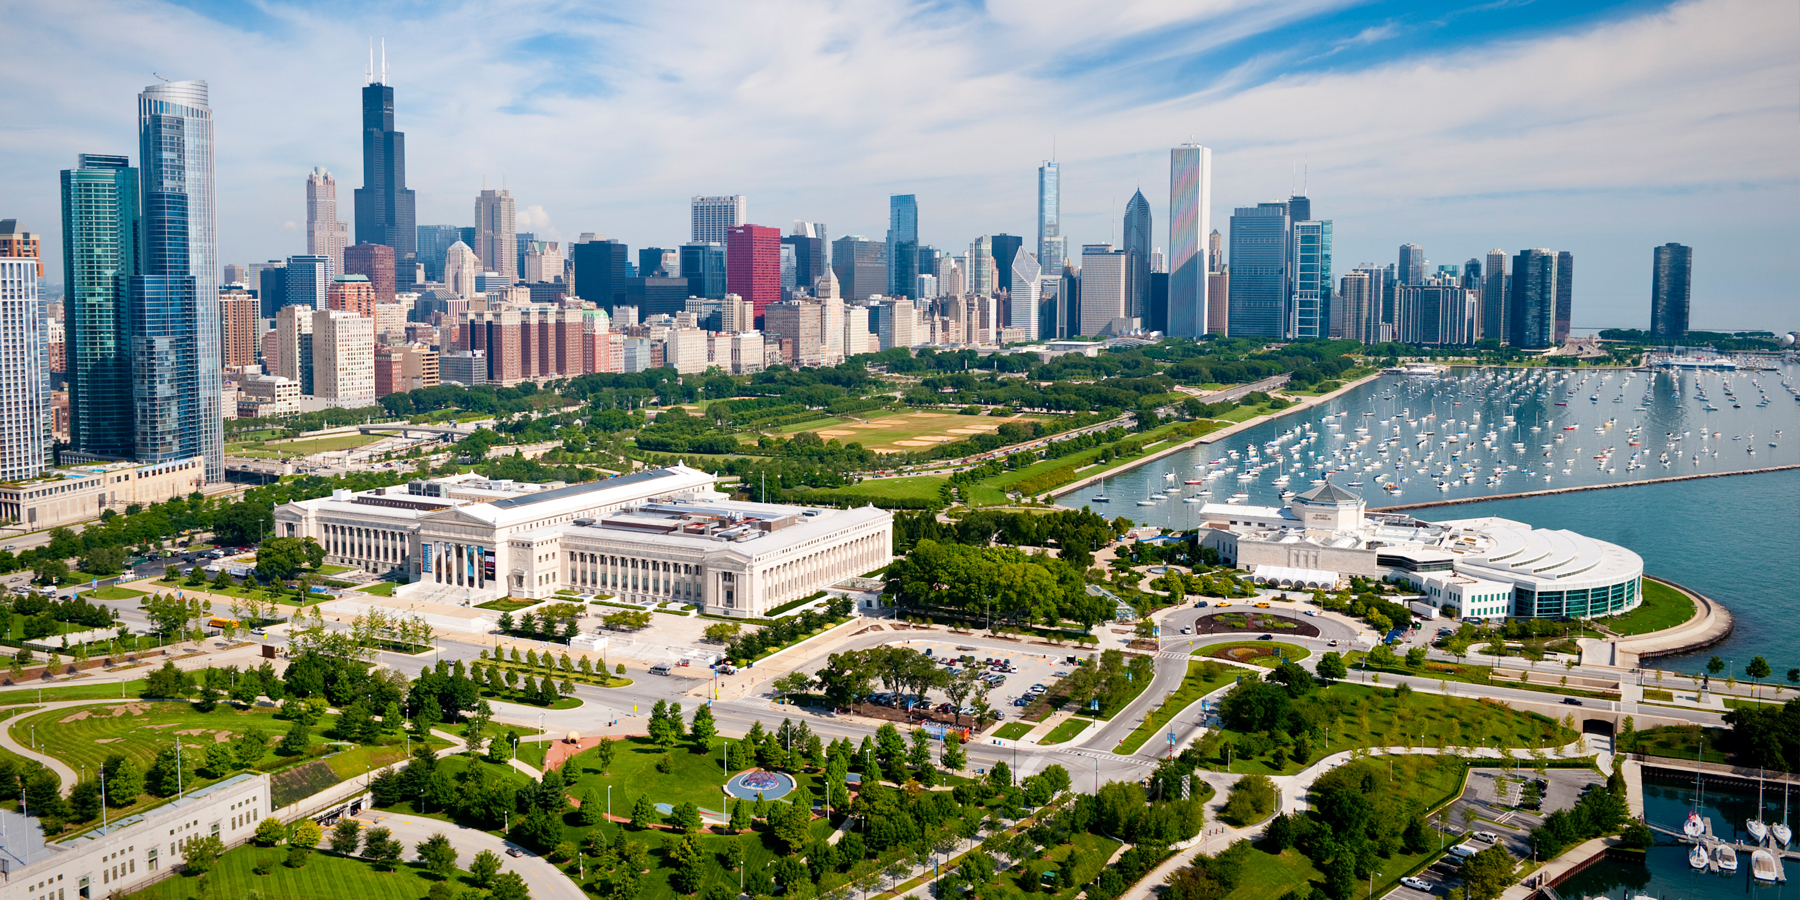 Chicago neighborhoods tourists should be avoiding as much as possible. (Photo: Choose Chicago)